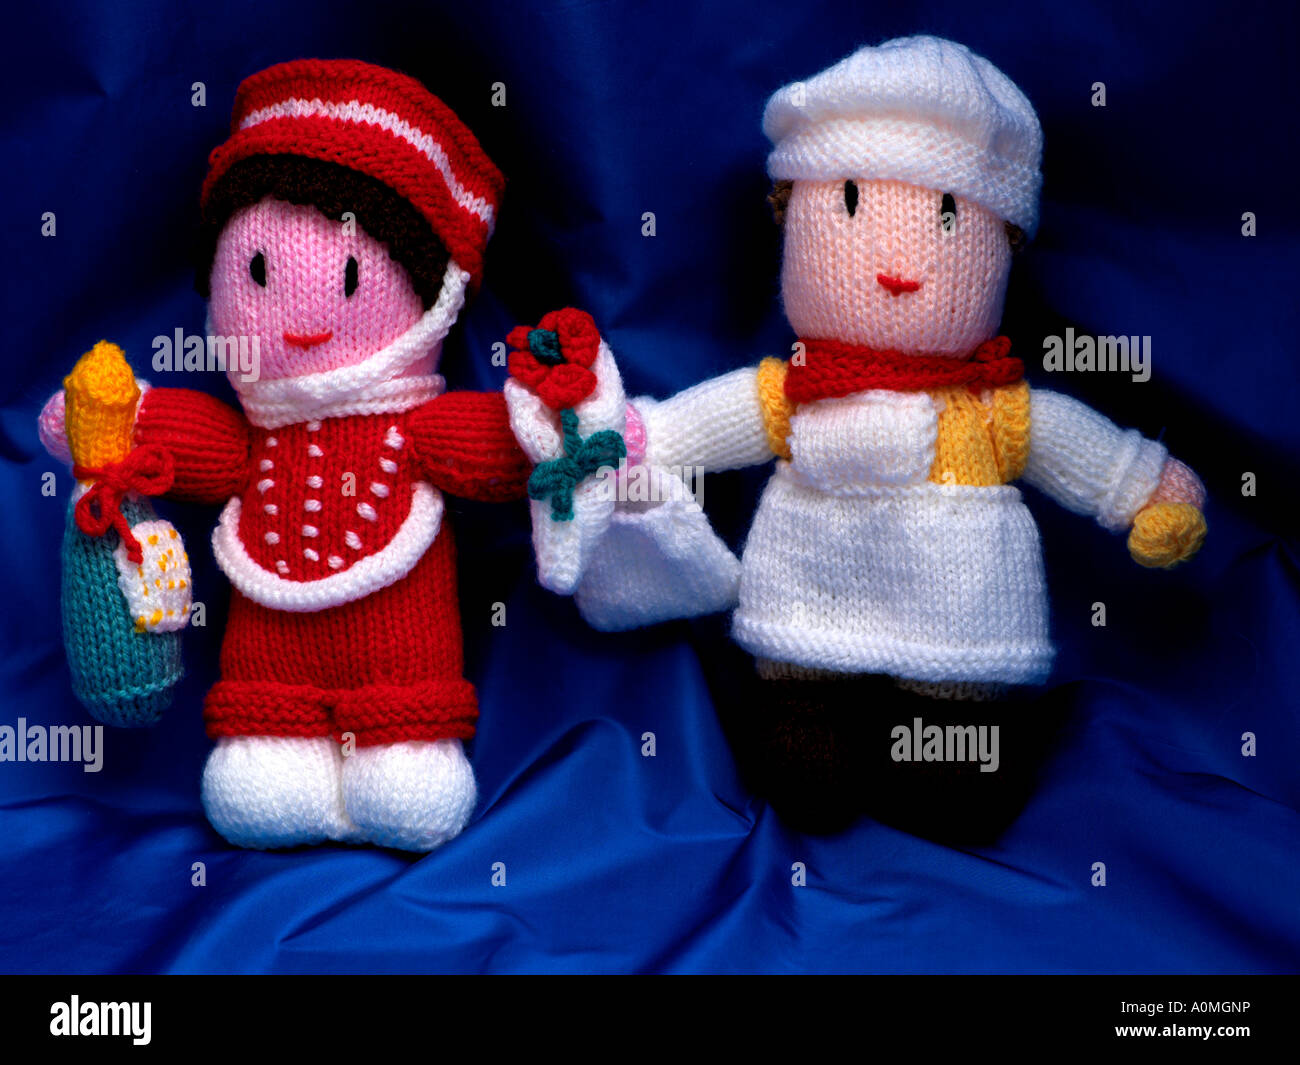 Due Soft fatto a mano KnittedToys Foto Stock